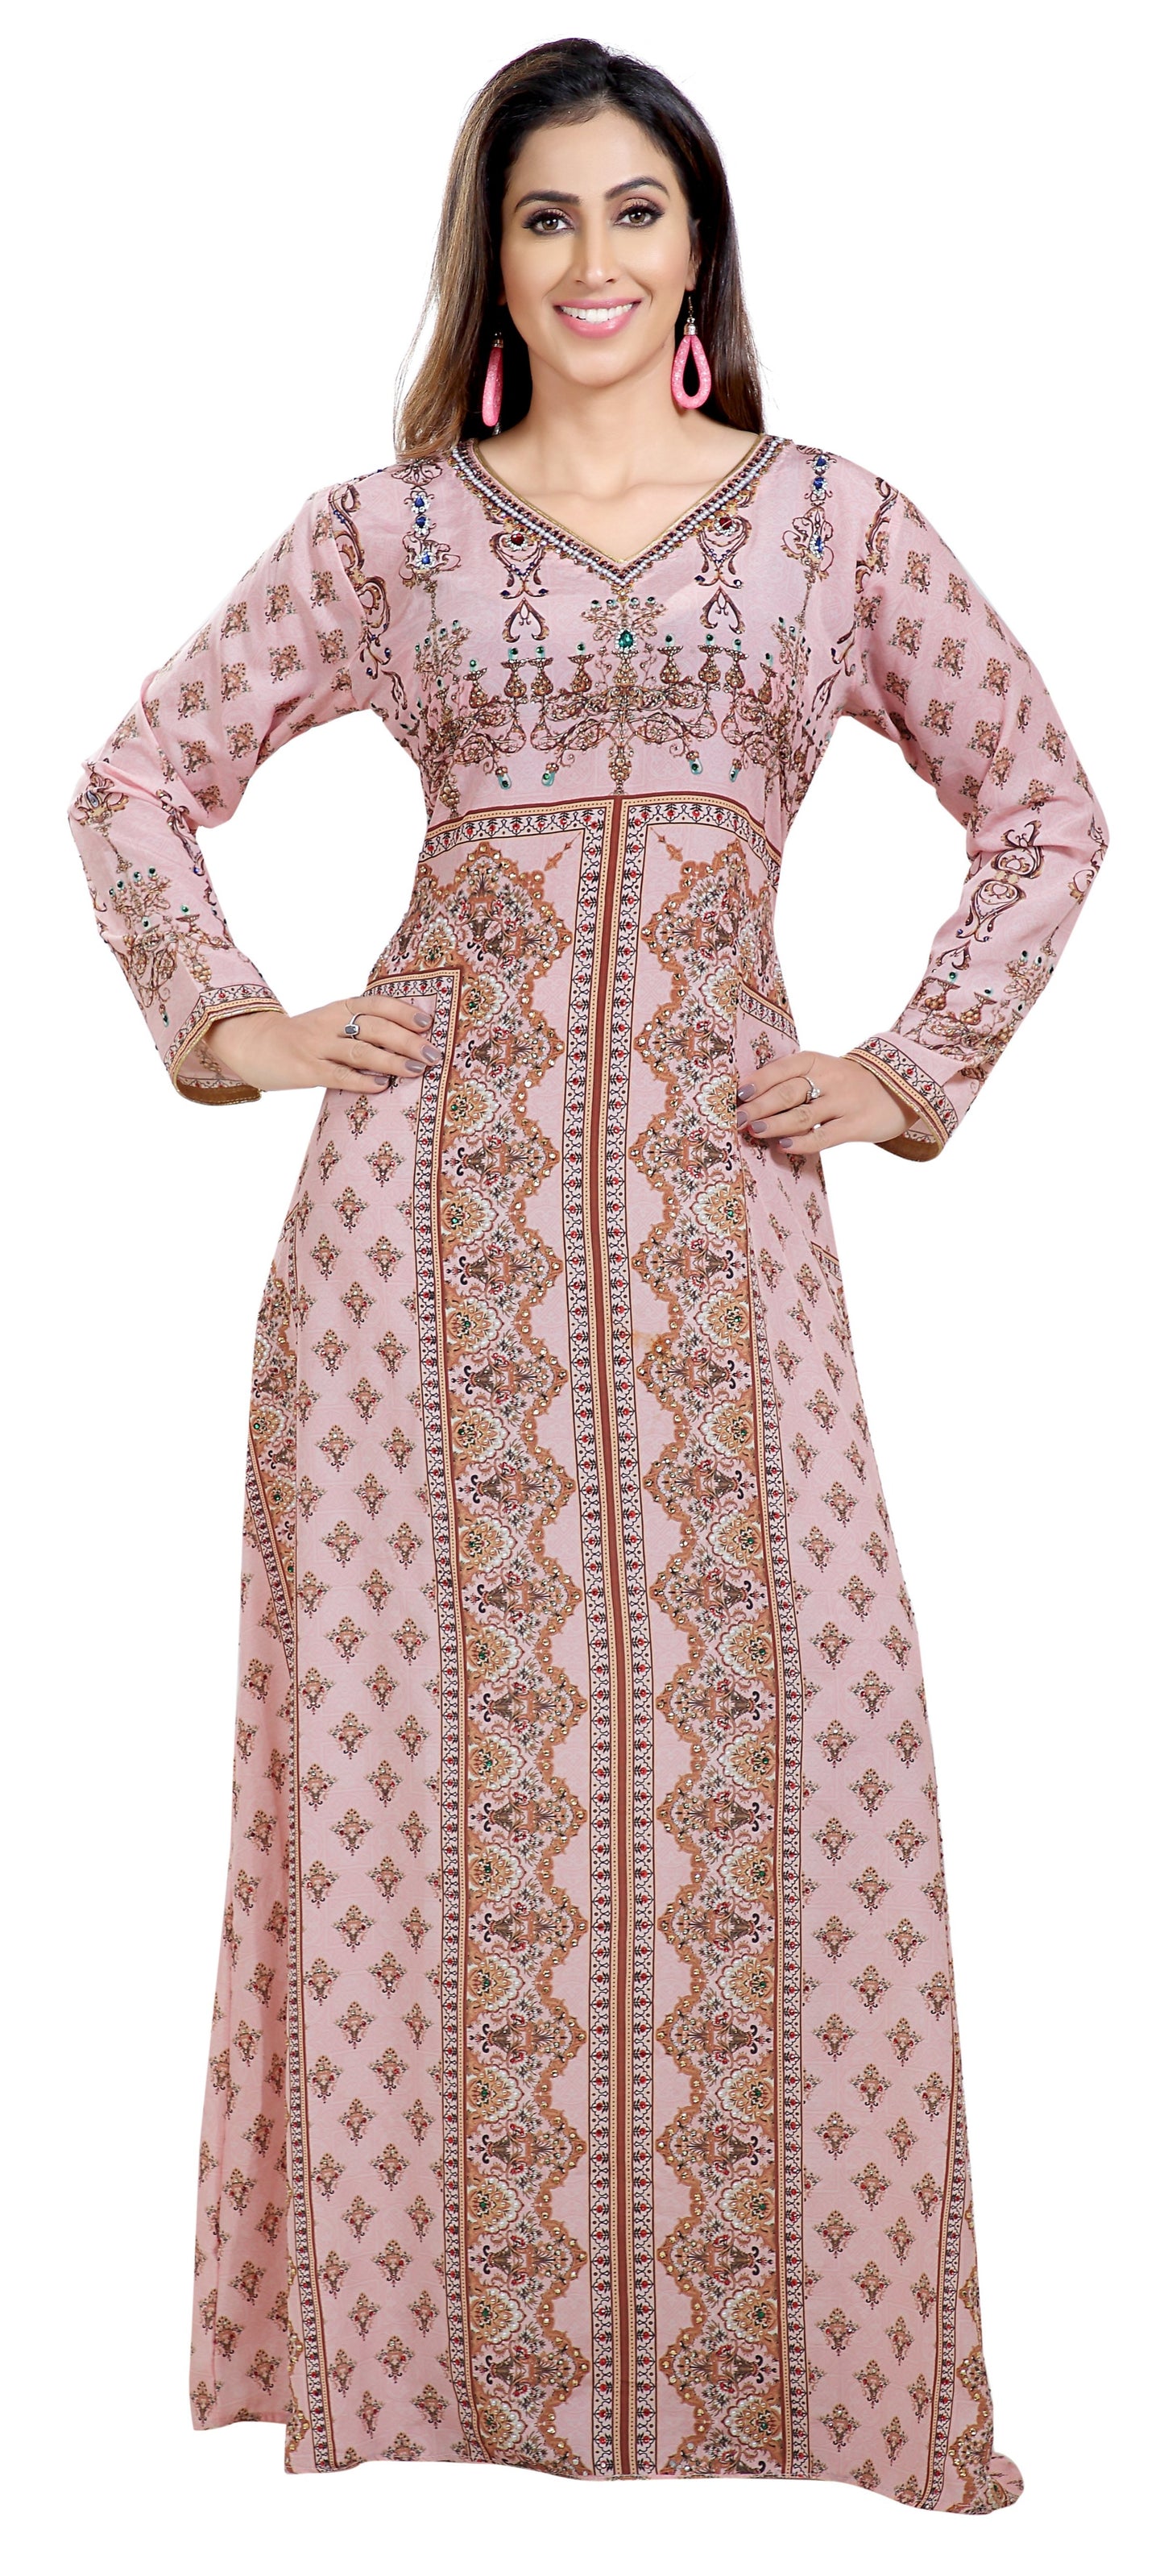 Light Pink Printed Kaftan with Green Embroidered Beads - Maxim Creation